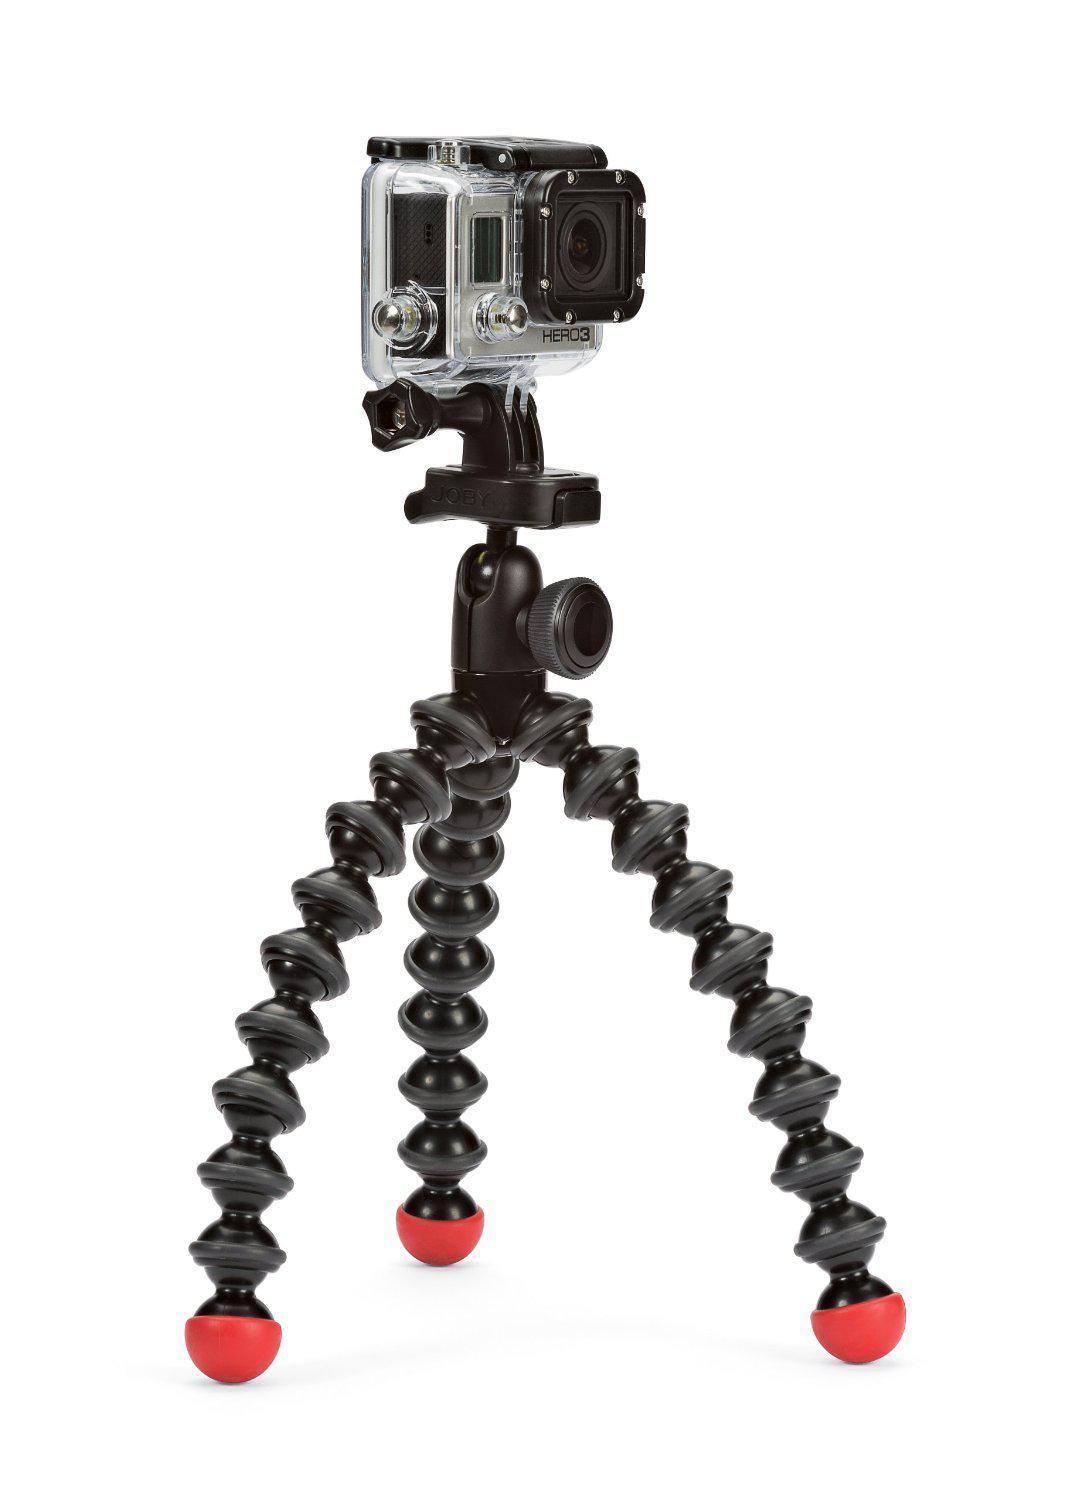 [OPEN BOX] JOBY Gorilla Pod Action Tripod with Mount For GO Pro